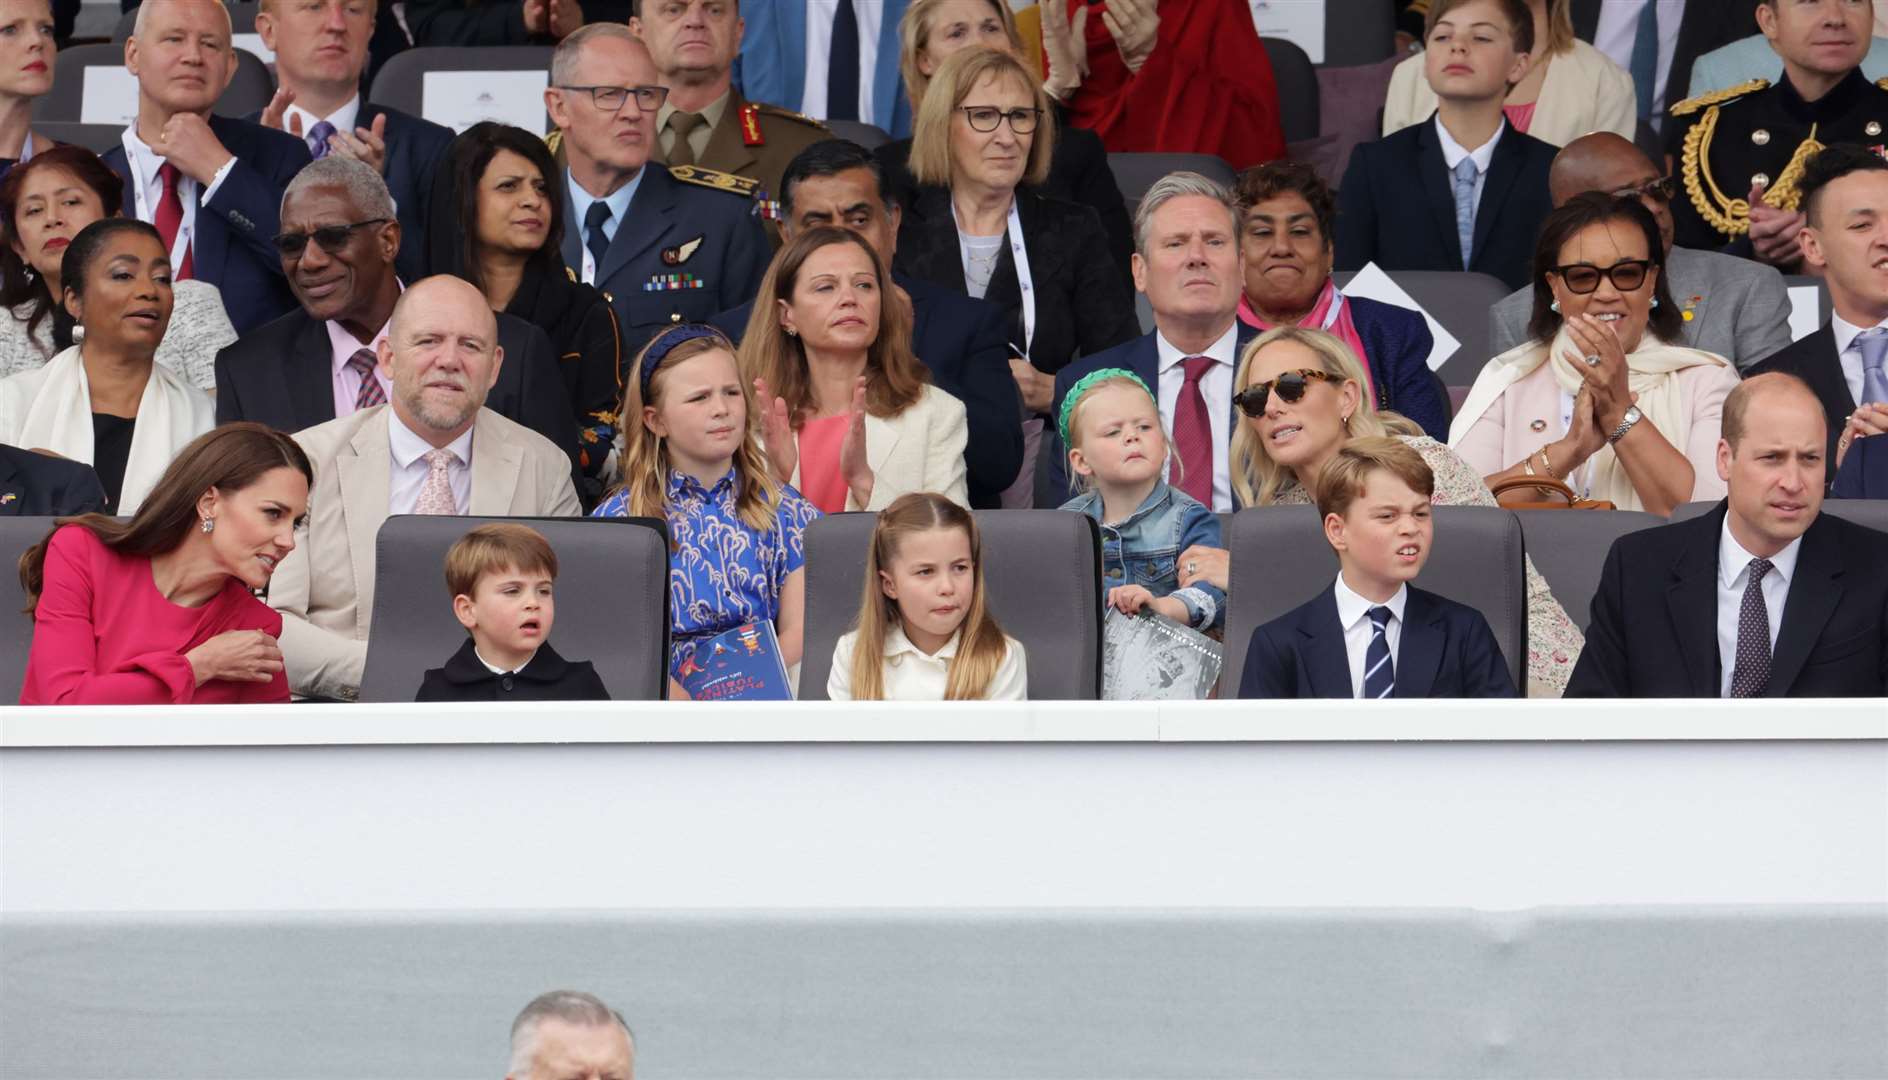 The Cambridges and their family had a front-row seat in the royal box (Chris Jackson/PA)